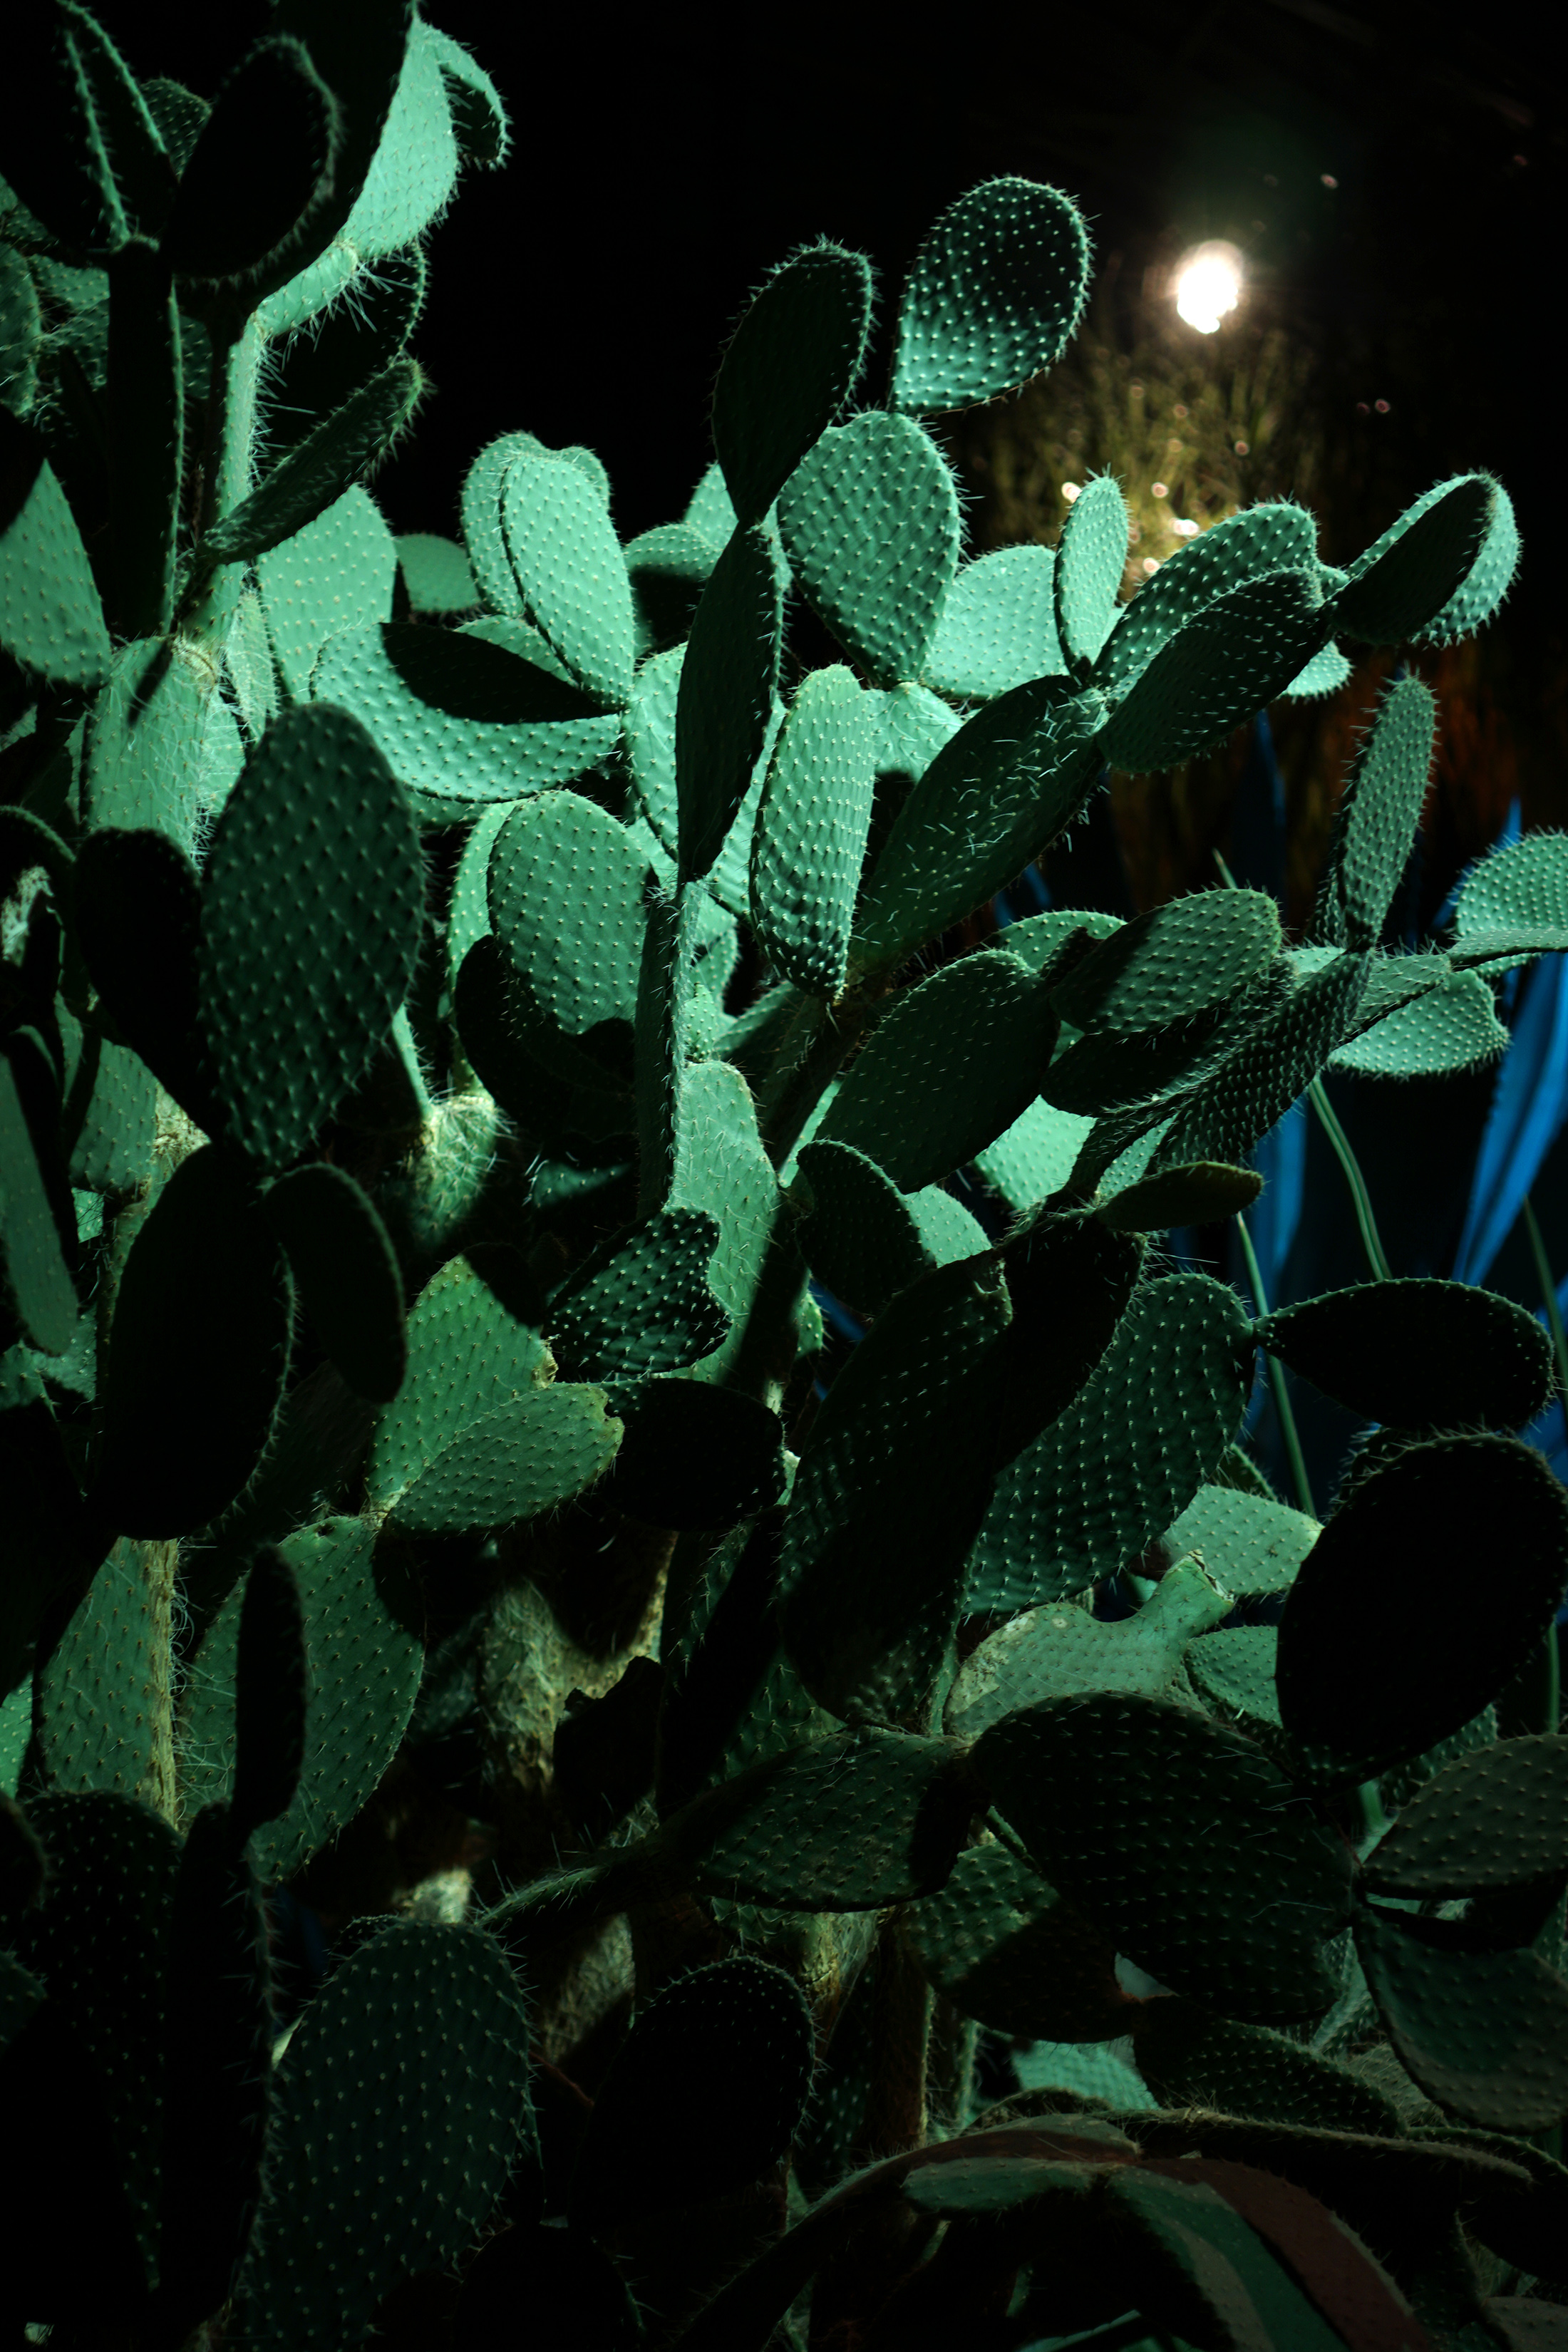 Cactus in the desert room, Garfield Park Conservatory at night, Chicago / Darker than Green